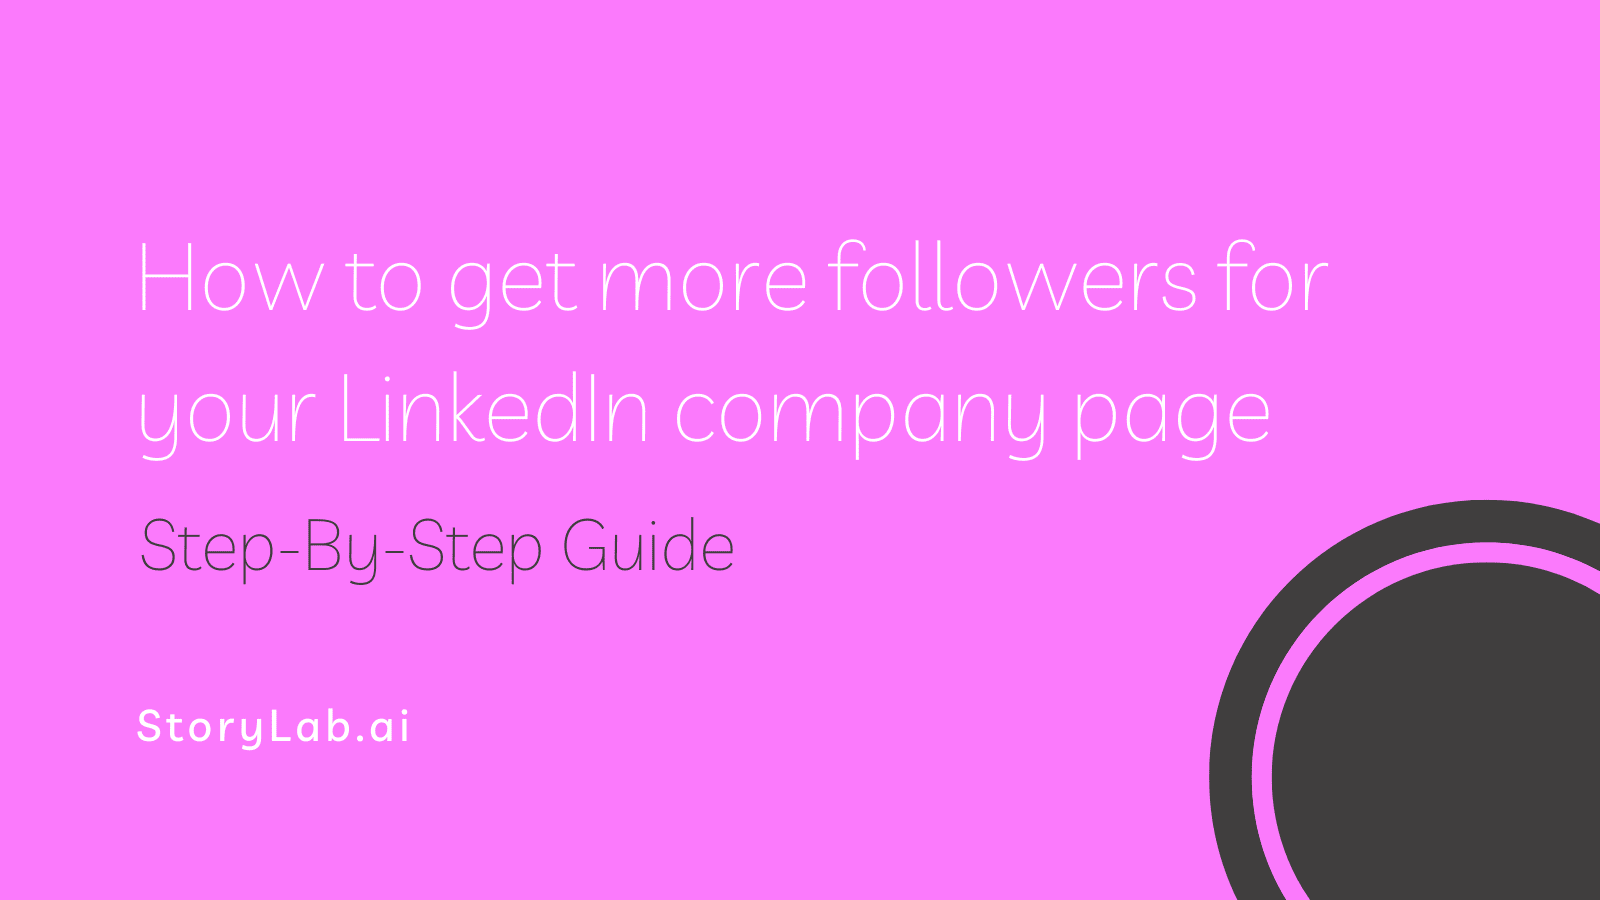 How to get more followers for your LinkedIn company page guide